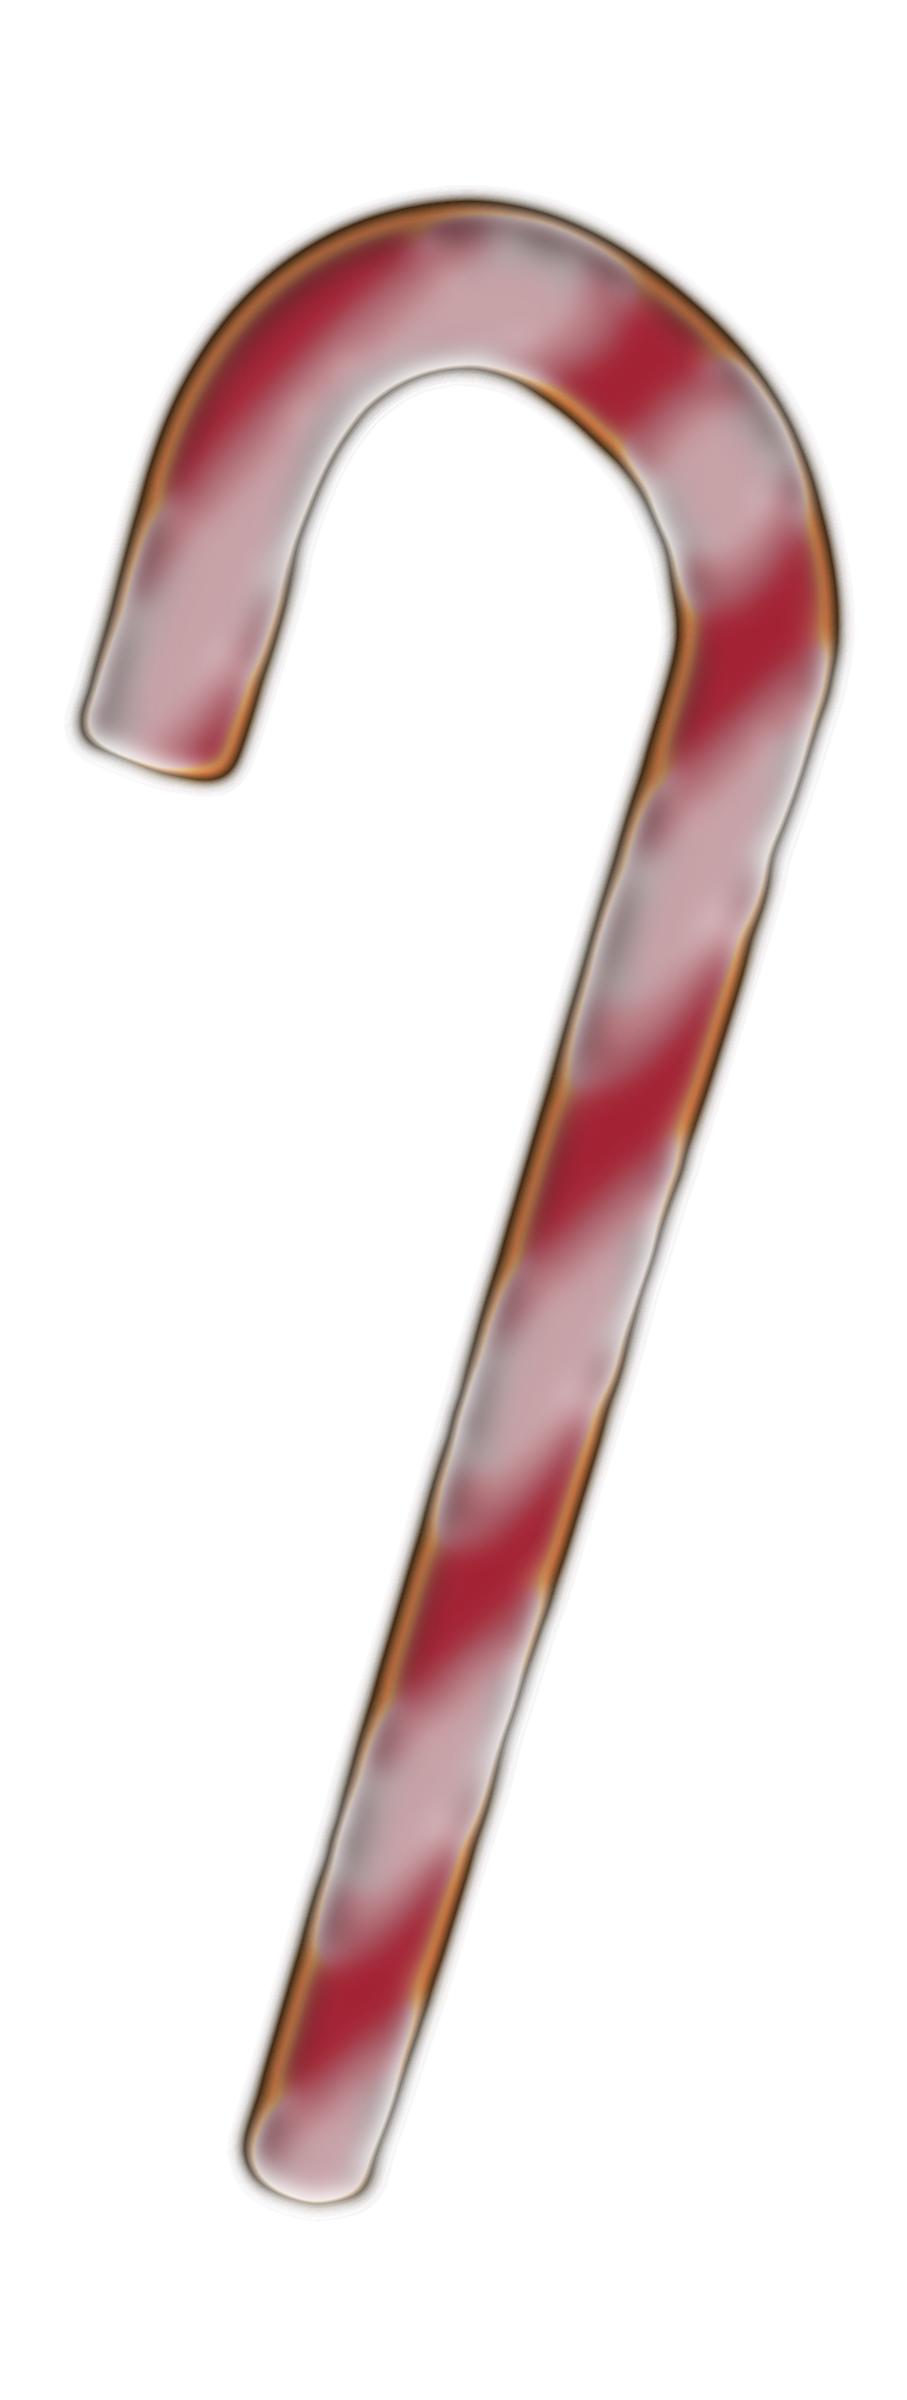 Candy Cane png